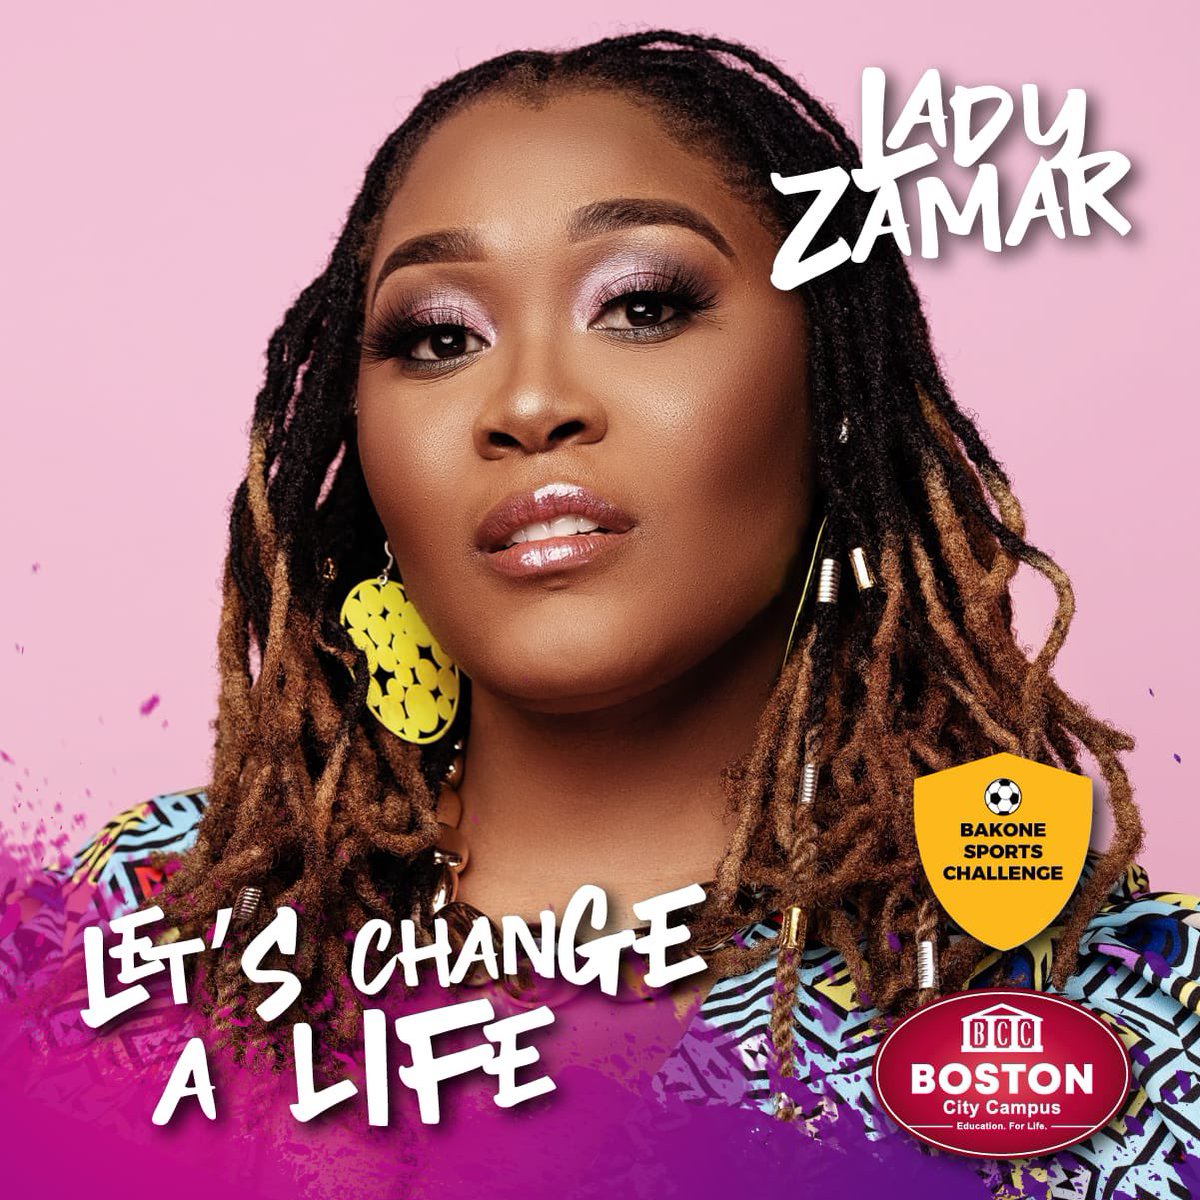 Myself, Lady Zamar together with #BOSTONCITYCAMPUS will be giving away a bursary worth R25 000 to a deserving individual. I challenge you all to join this initiative giving out even more bursaries!!!

For more information send mail to: ladyzamar@boston.co.za.

📚